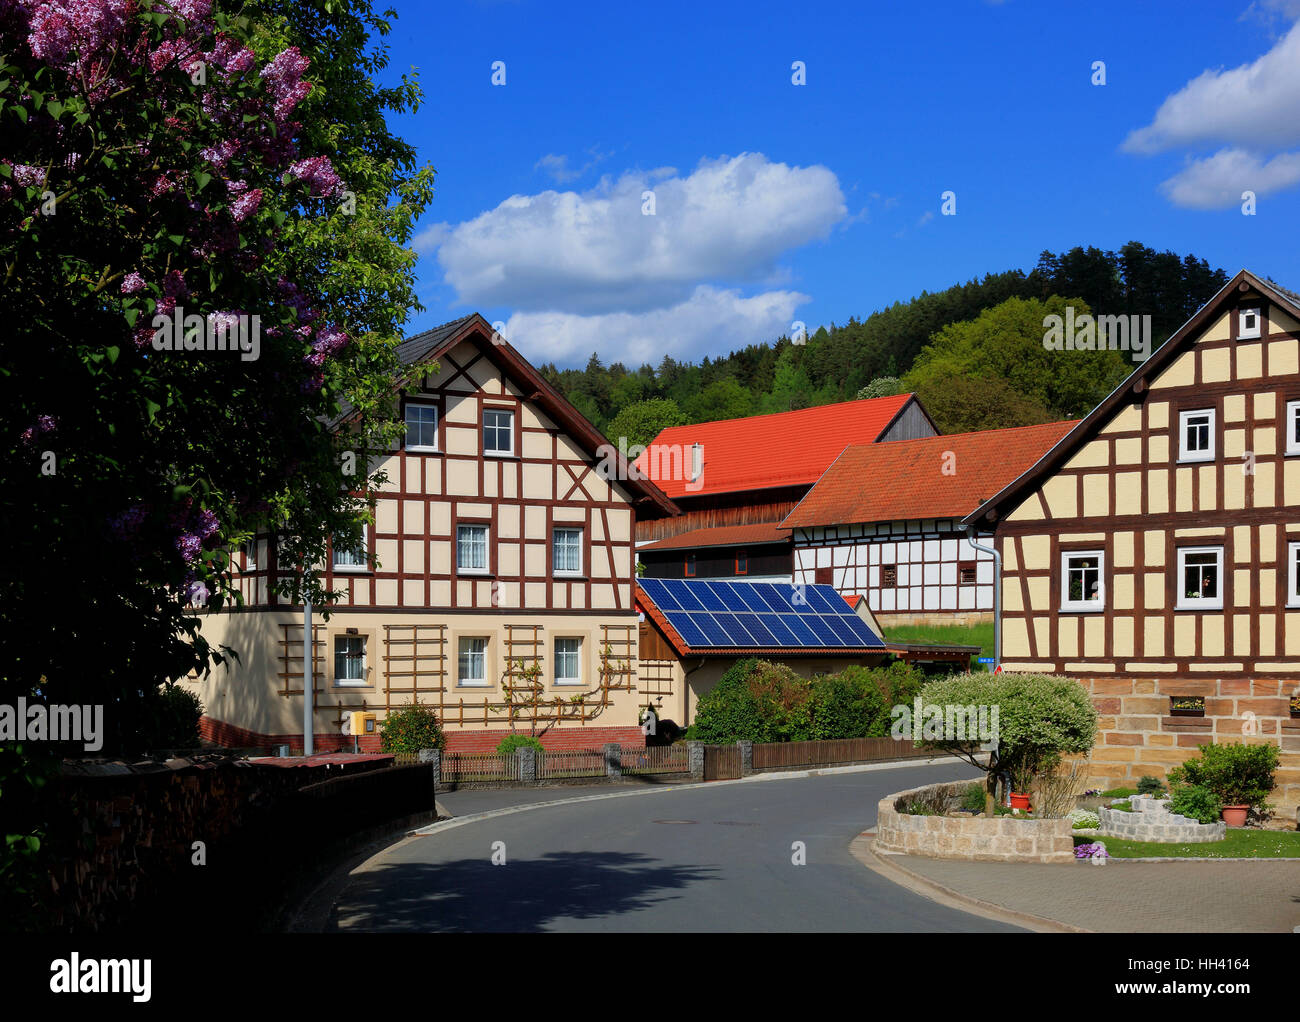 Framework houses at Schimmendorf, Gemeinde Mainleus, district of  Kulmbach, Upper Franconia, Bavaria, Germany Stock Photo